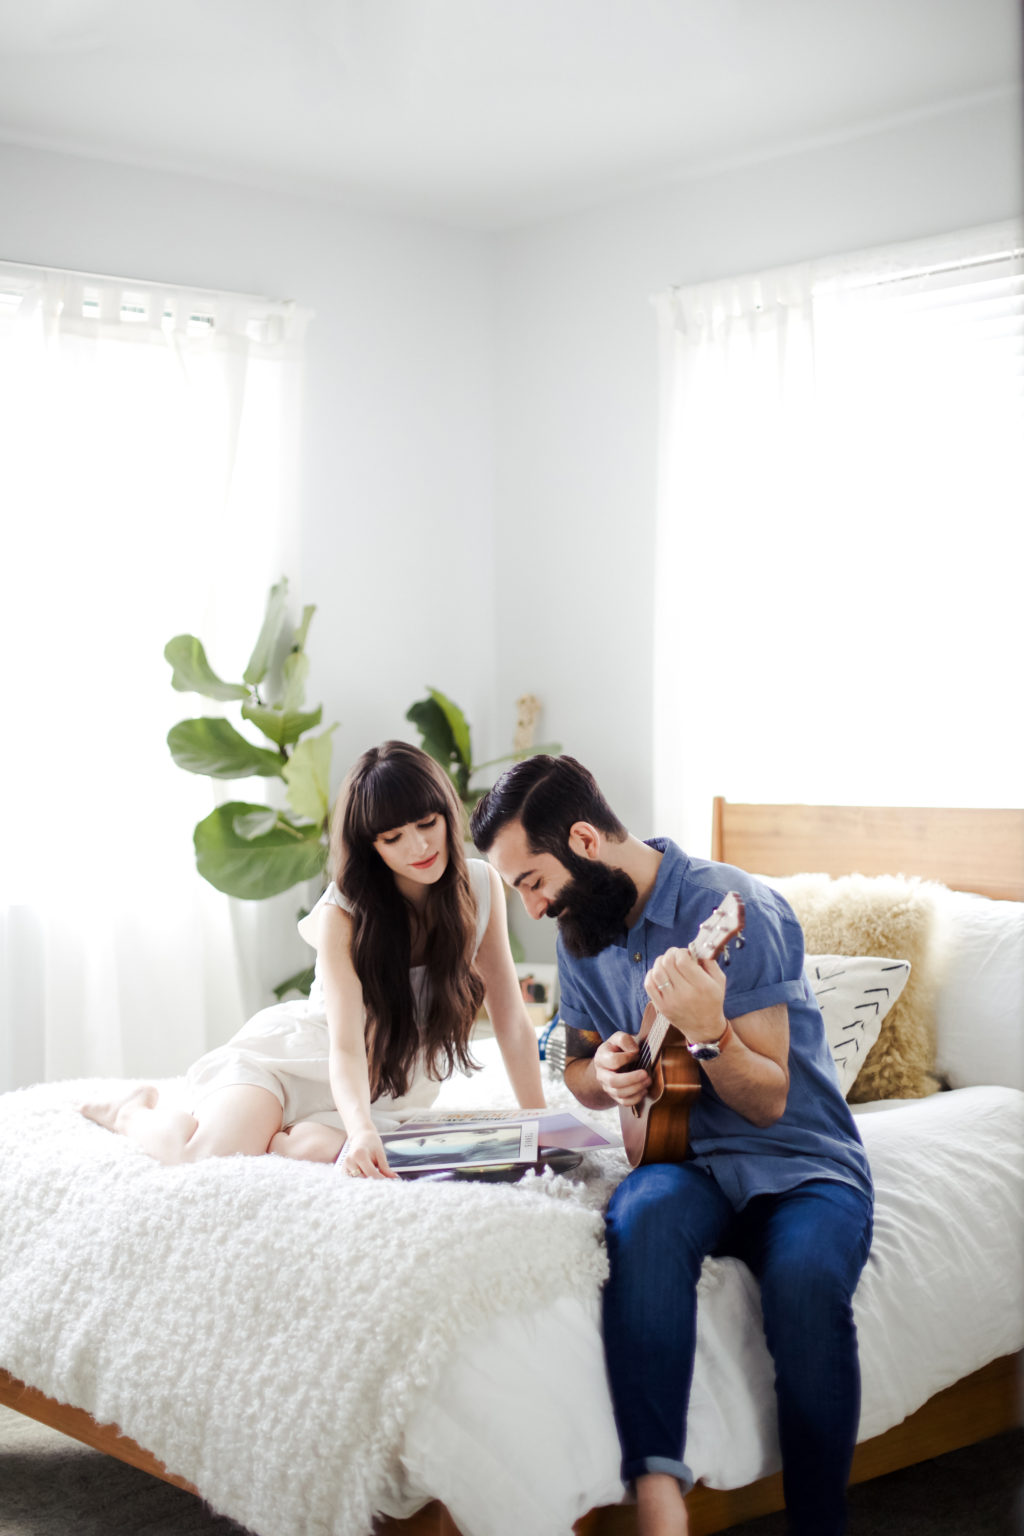 NewDarlings - Records in bed - Lifestyle Photography